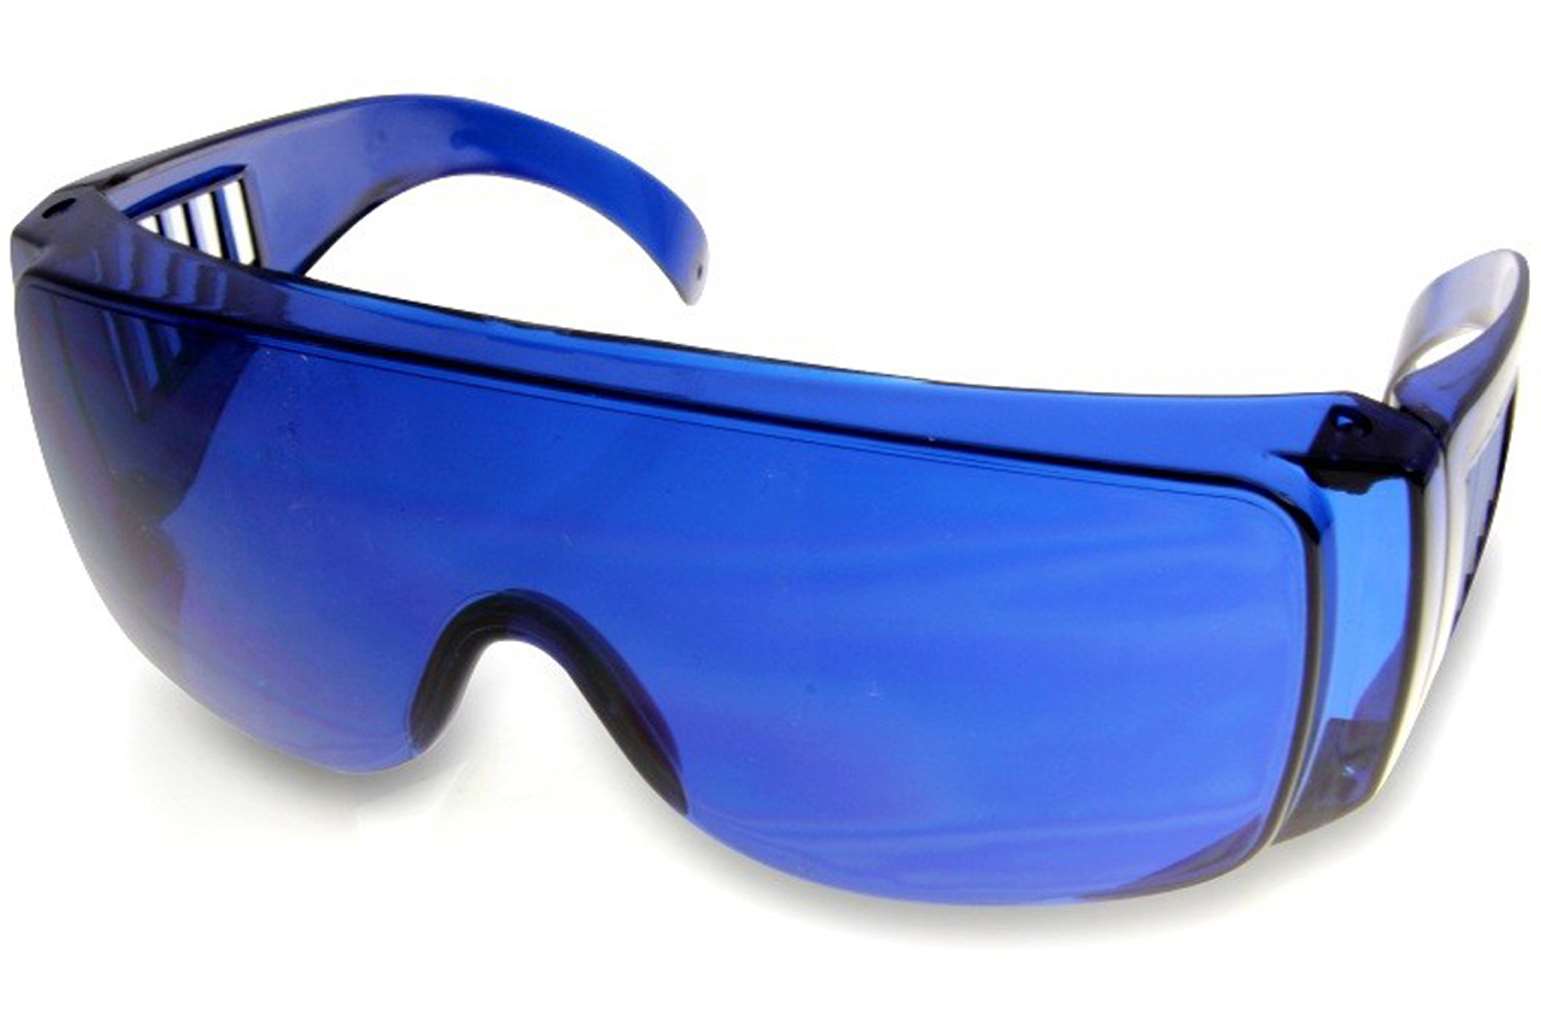 FOR HIM: Whether you can’t find your golf ball because you’ve smashed it so brilliantly far, or so not so brilliantly into the rough, these glasses are here to help, seeking out lost balls in the flora with their blue tinted hue. £6.99 from Menkind